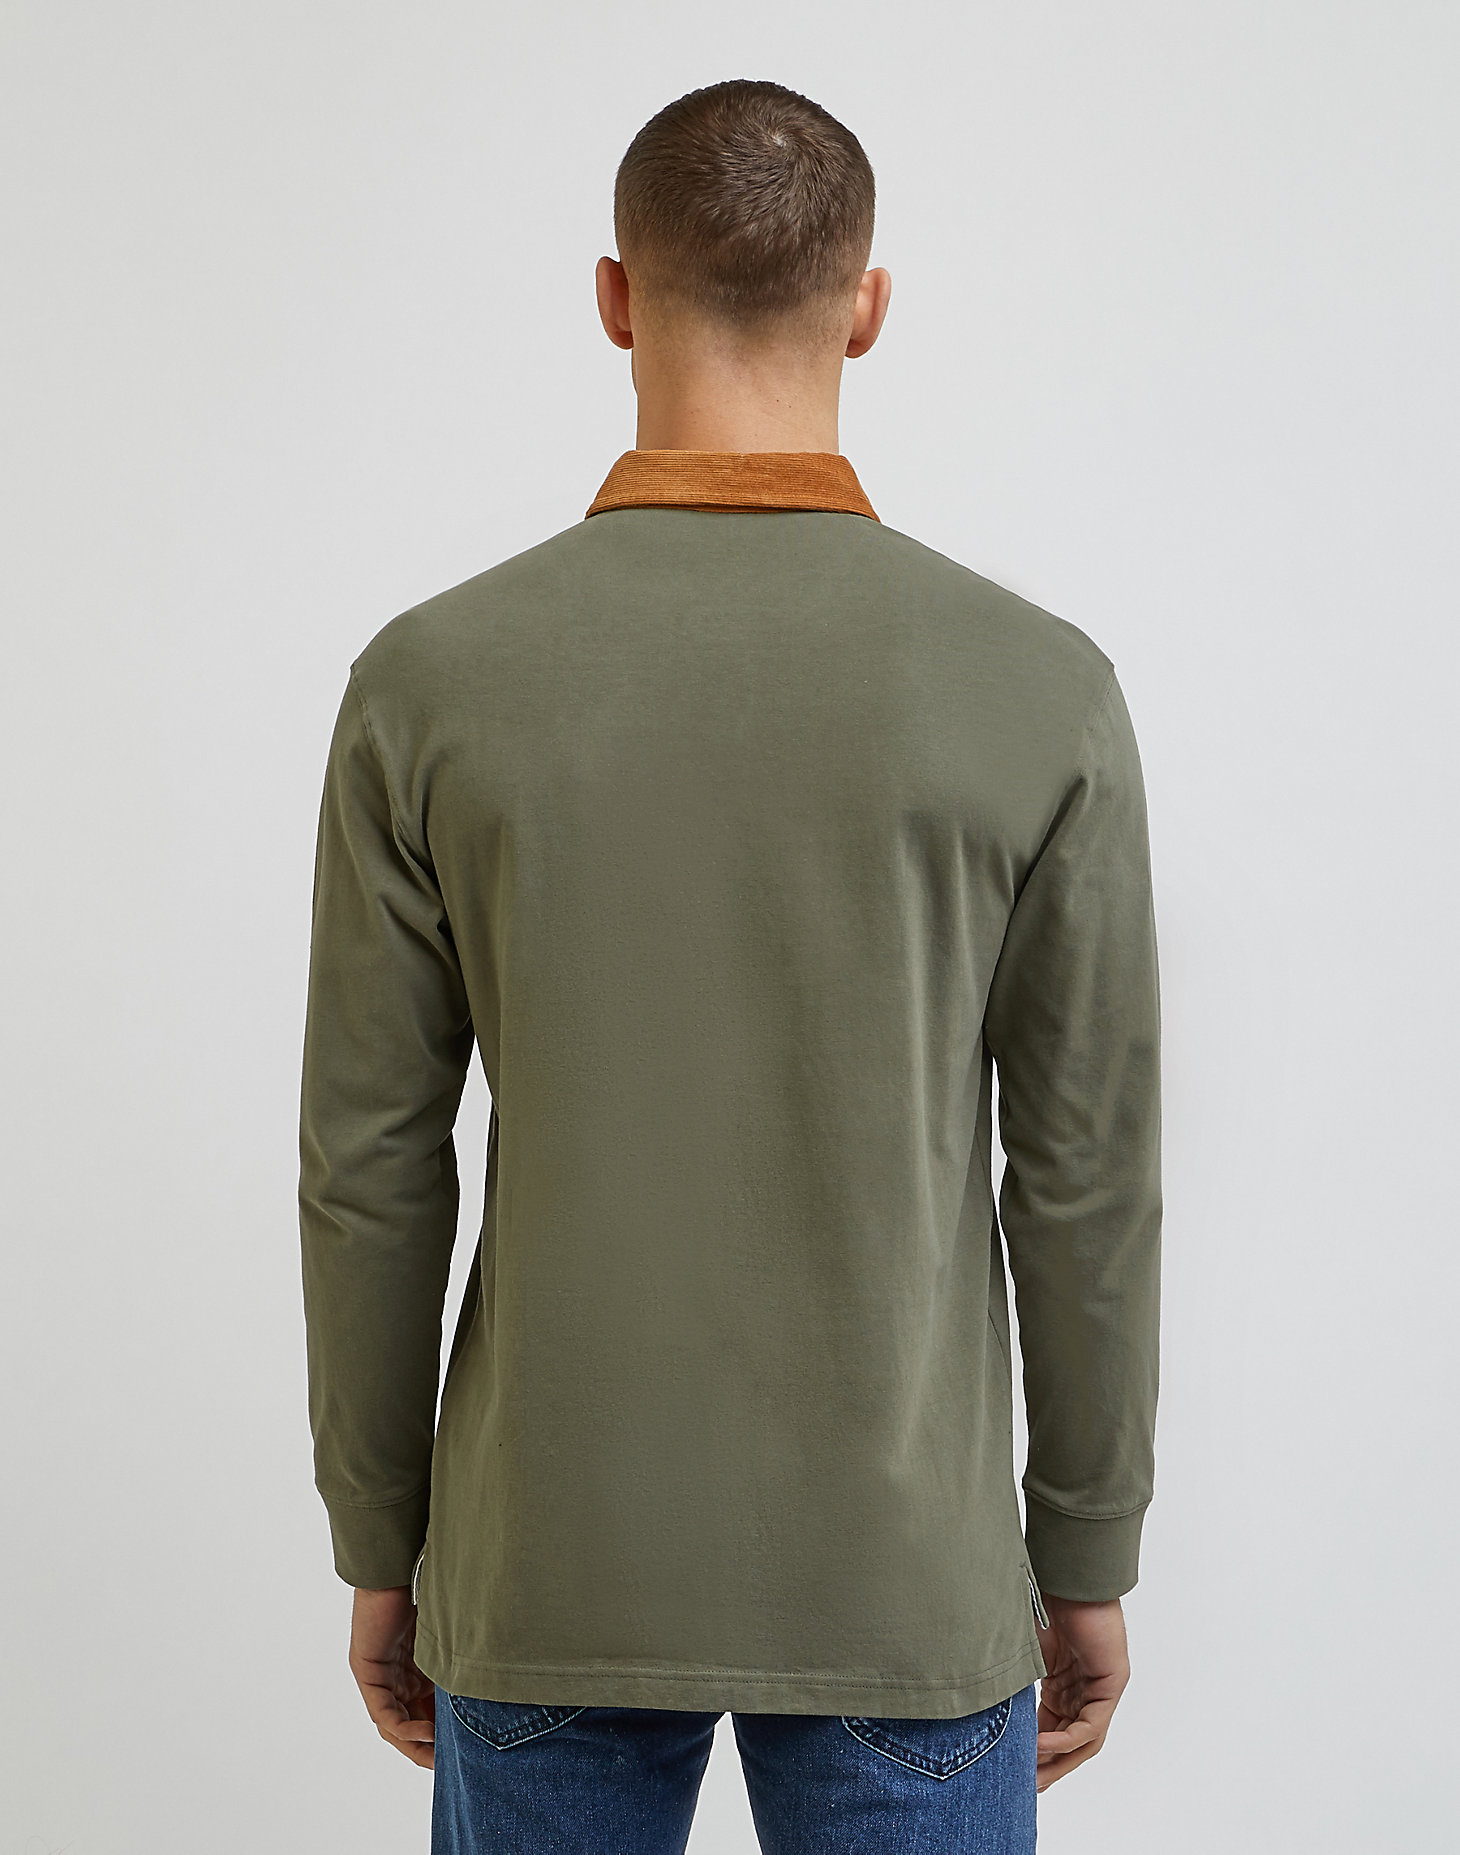 Long Sleeve Contrast Collar Polo in Olive Grove alternative view 1